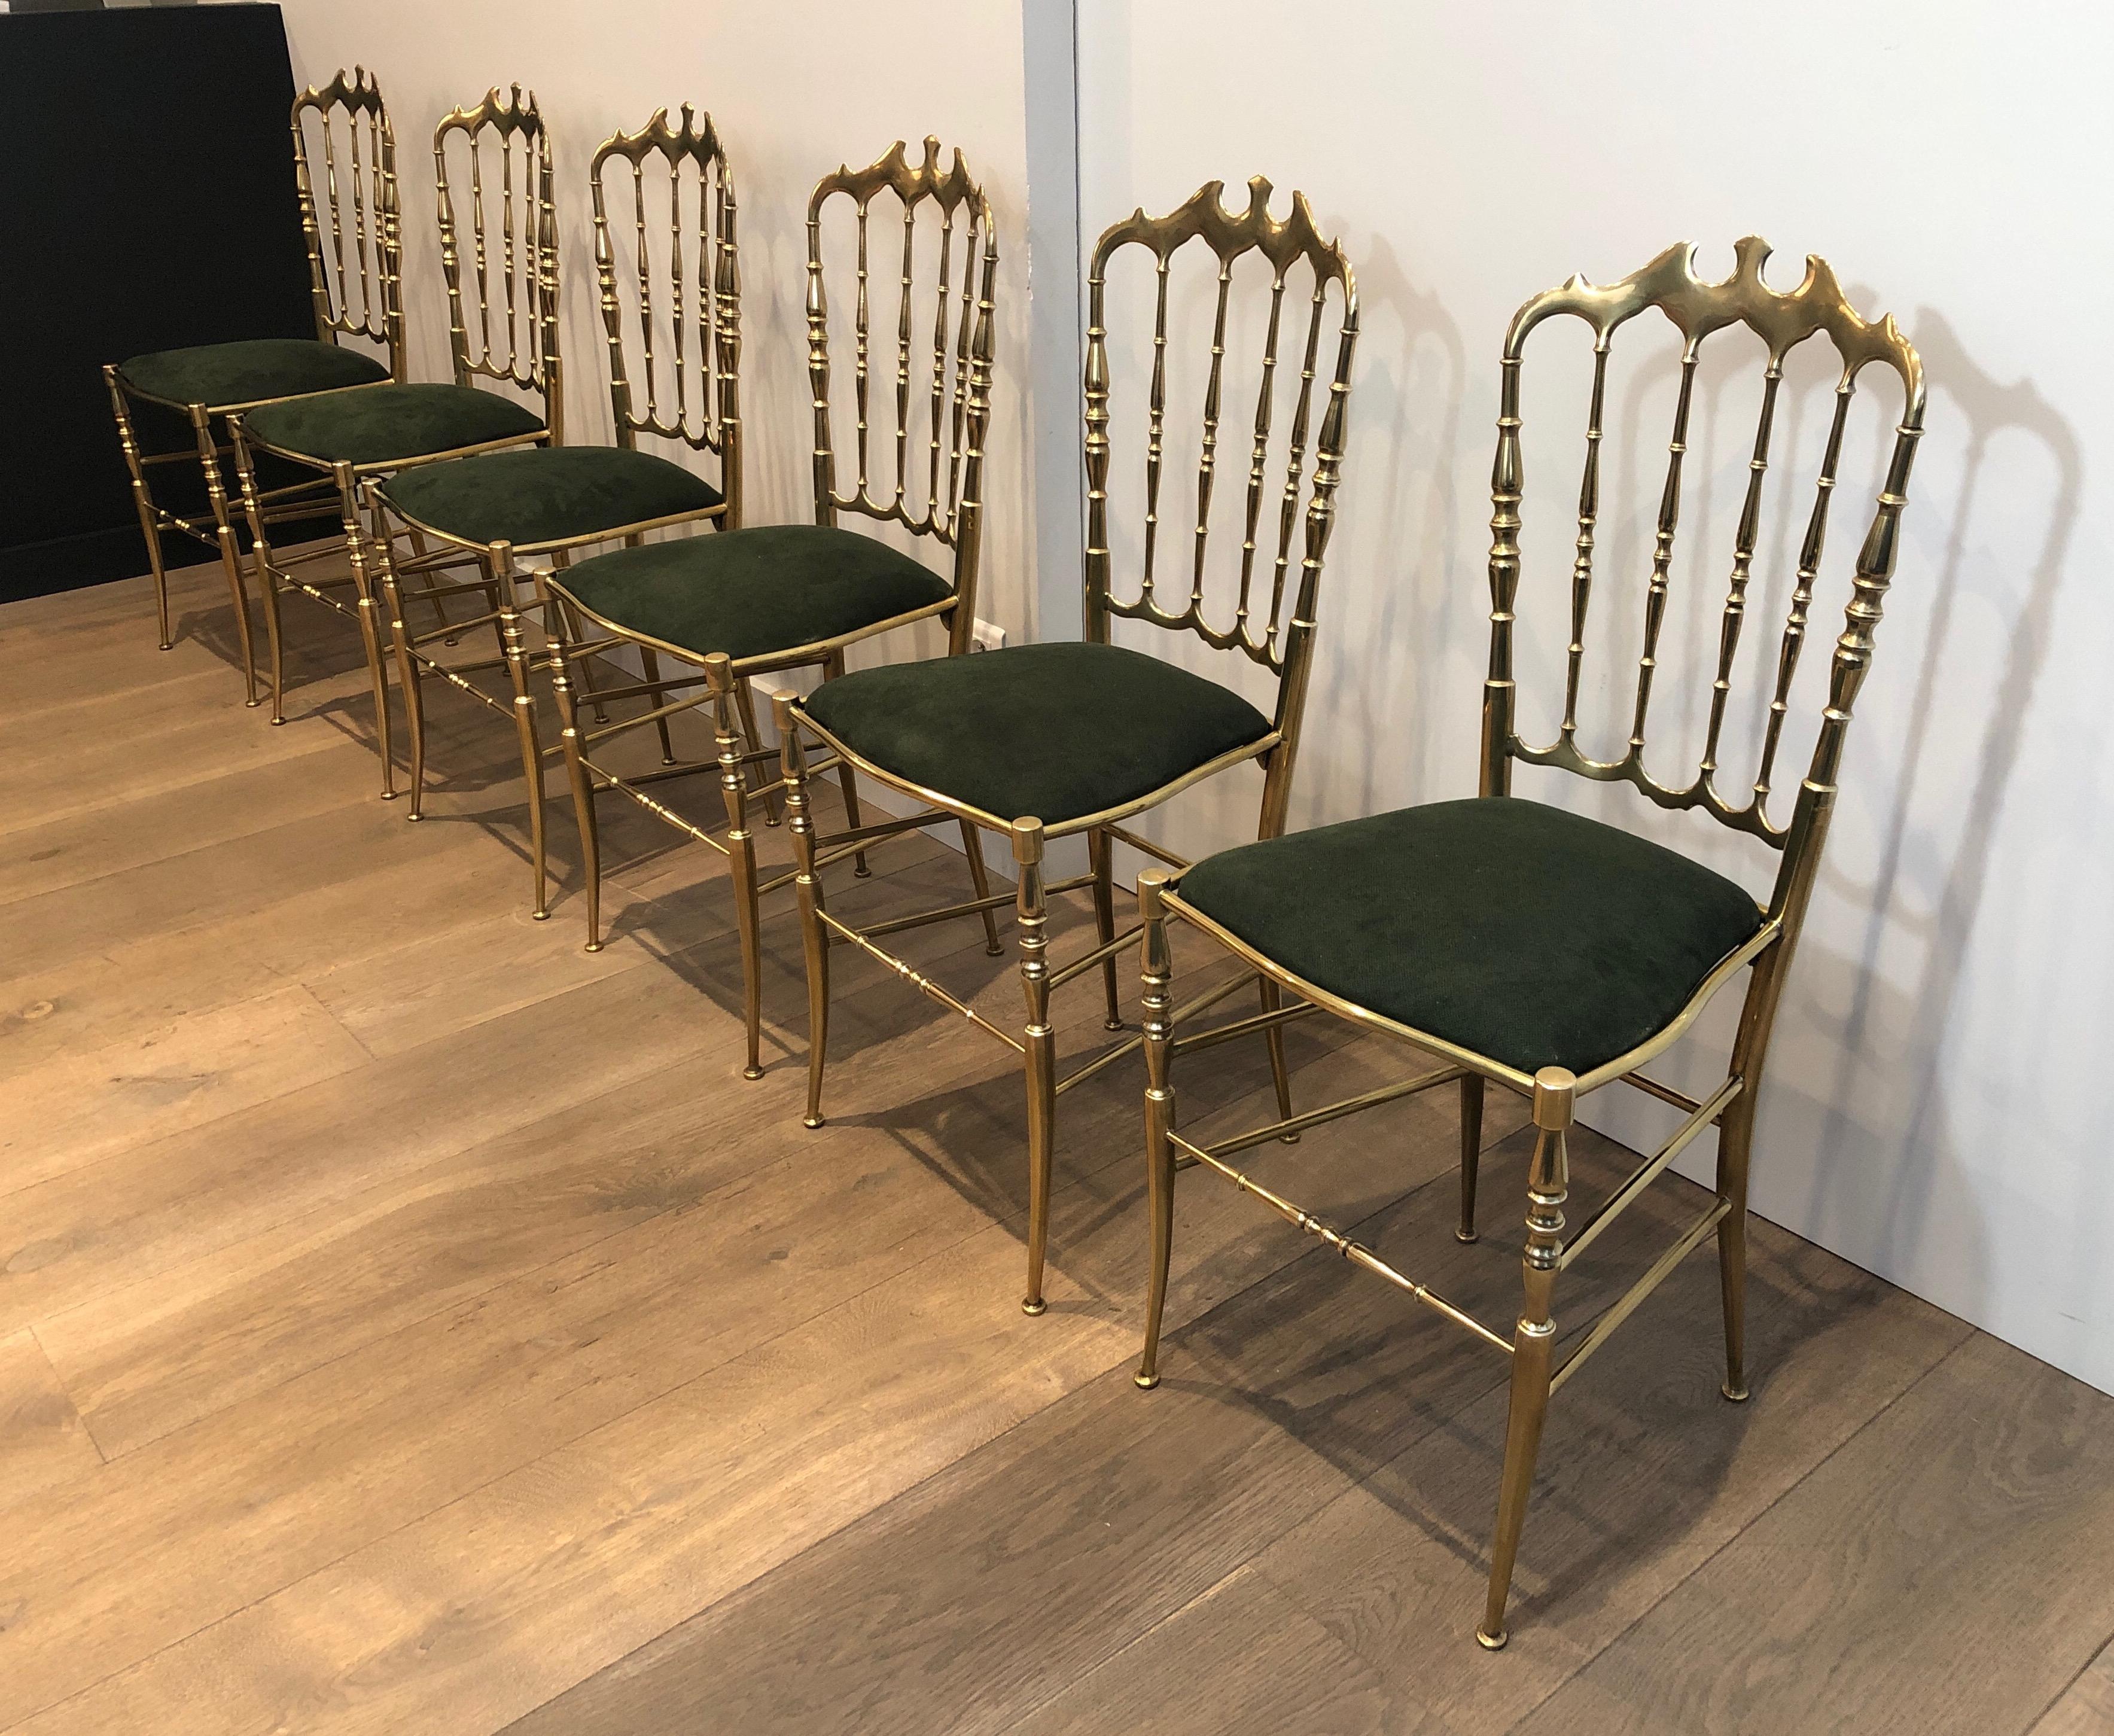 Neoclassical Rare Suite of 6 Beautifully Crafted Brass Chiavari Chairs, Seats Green Covered